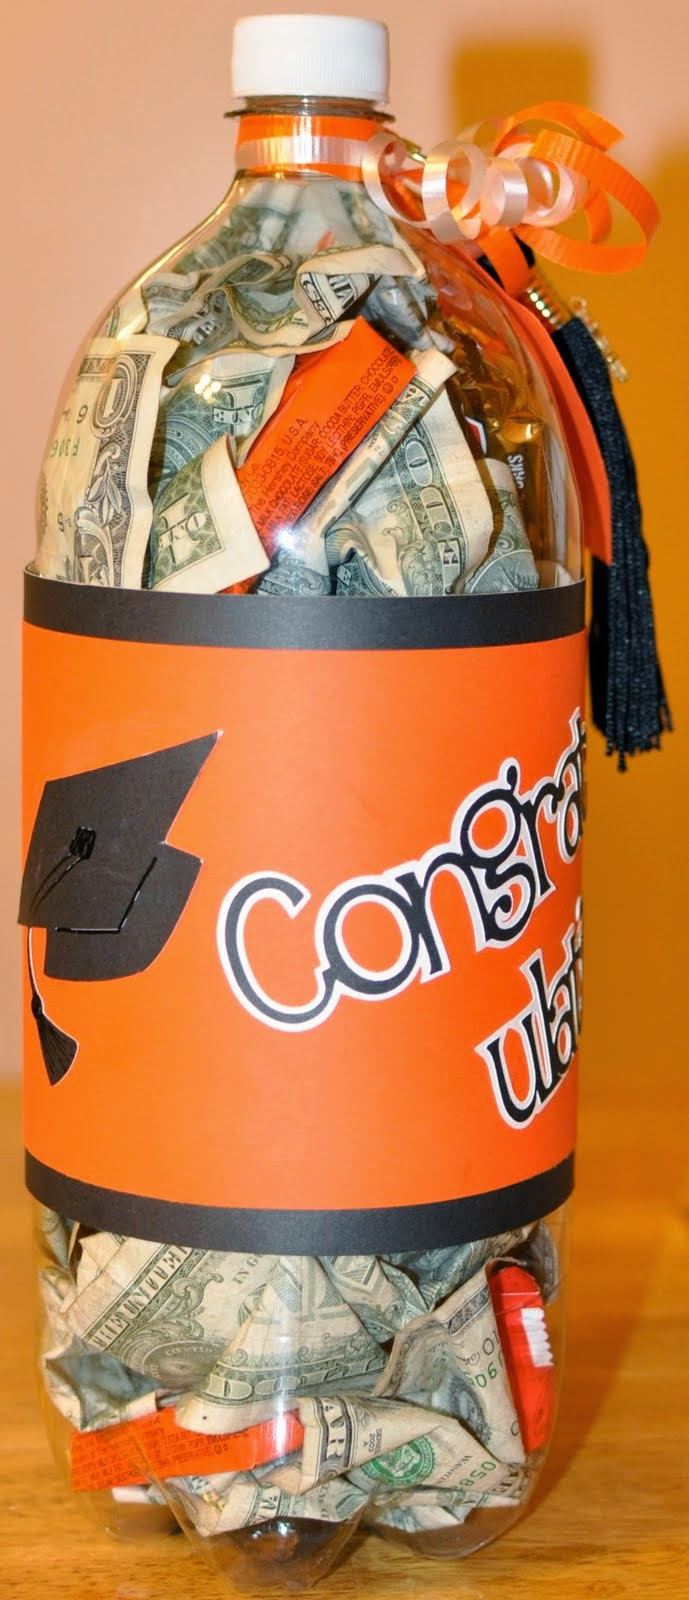 Money Graduation Gift Ideas
 GIFTS THAT SAY WOW Fun Crafts and Gift Ideas Graduation